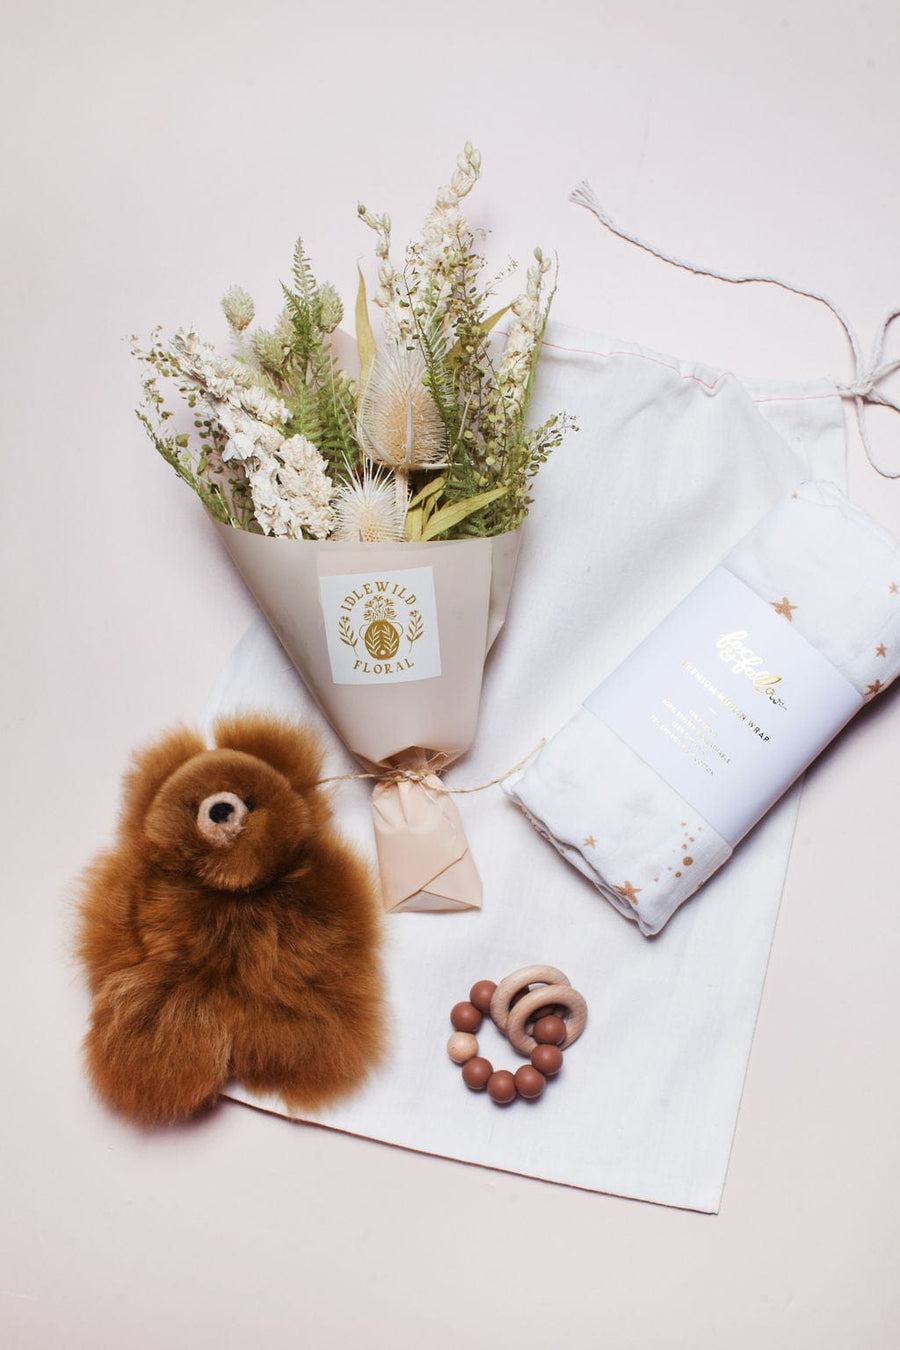 Idlewild Floral Co. Gift Giving Baby Boy Gift Set